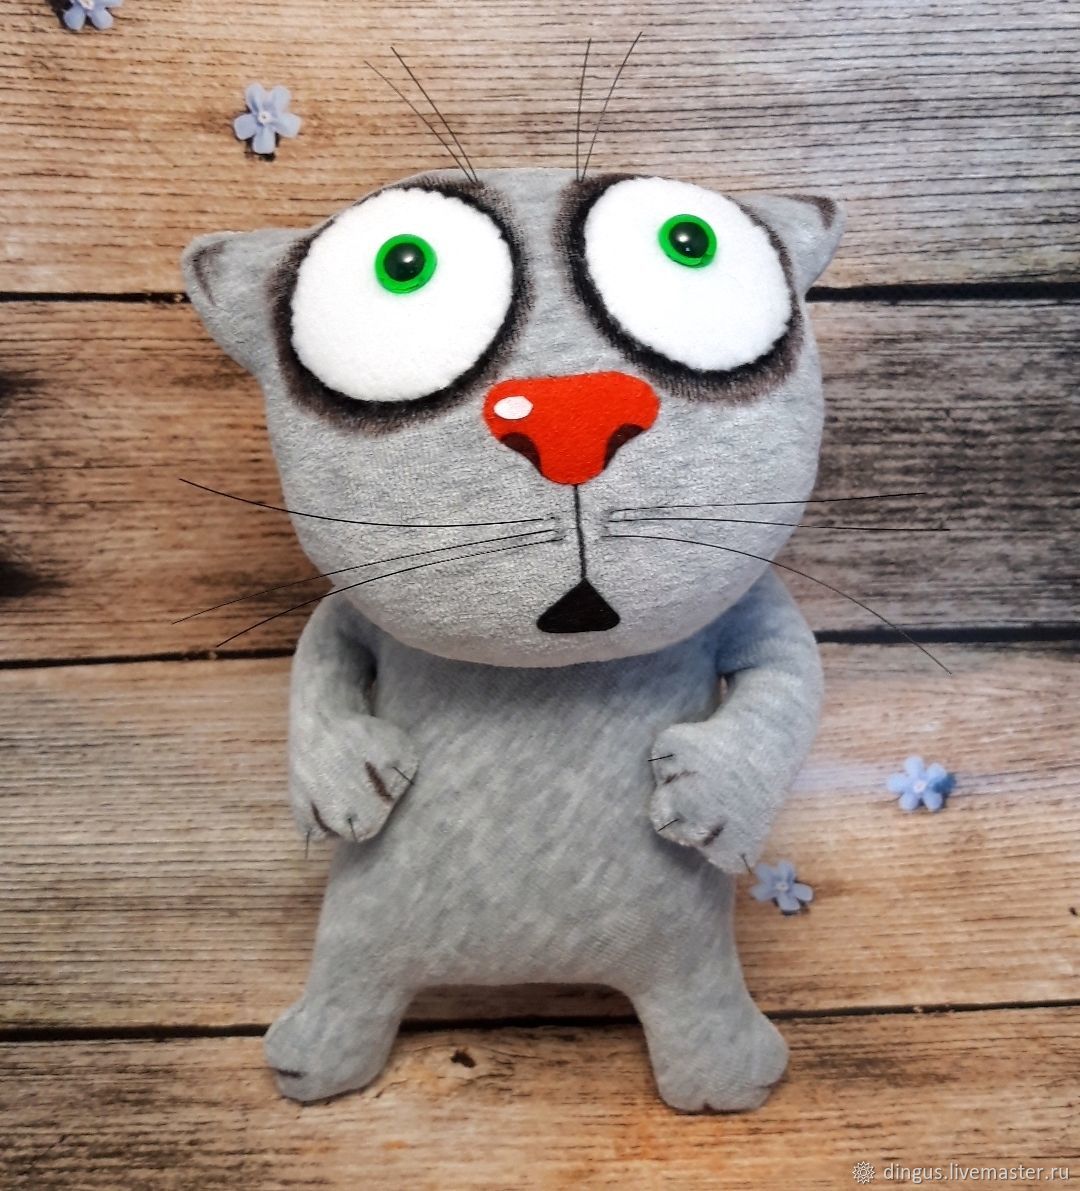 Soft toy grey plush cat scared for cat lovers, Stuffed Toys, Moscow,  Фото №1